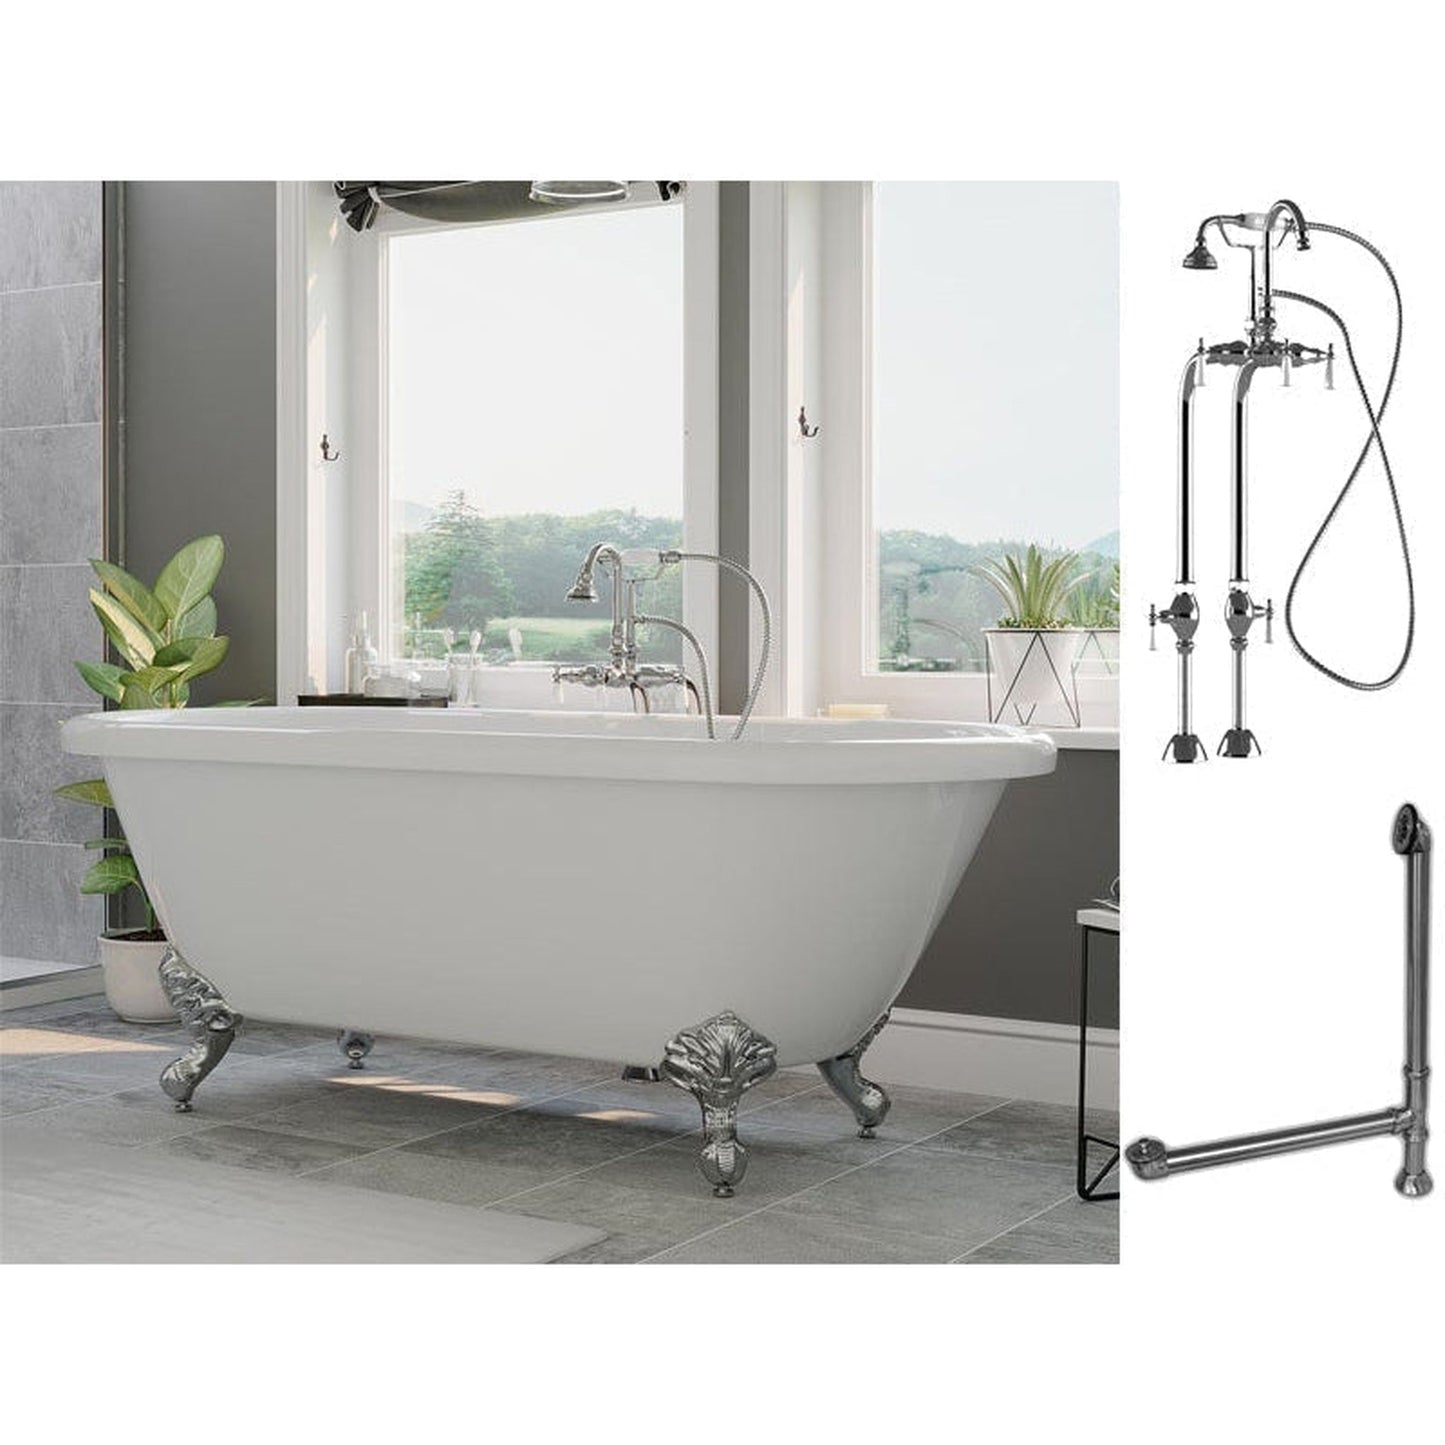 Cambridge Plumbing 60" White Acrylic Double Ended Clawfoot Bathtub With No Deck Holes And Complete Plumbing Package Including Freestanding English Telephone Gooseneck Faucet, Drain And Overflow Assembly In Polished Chrome